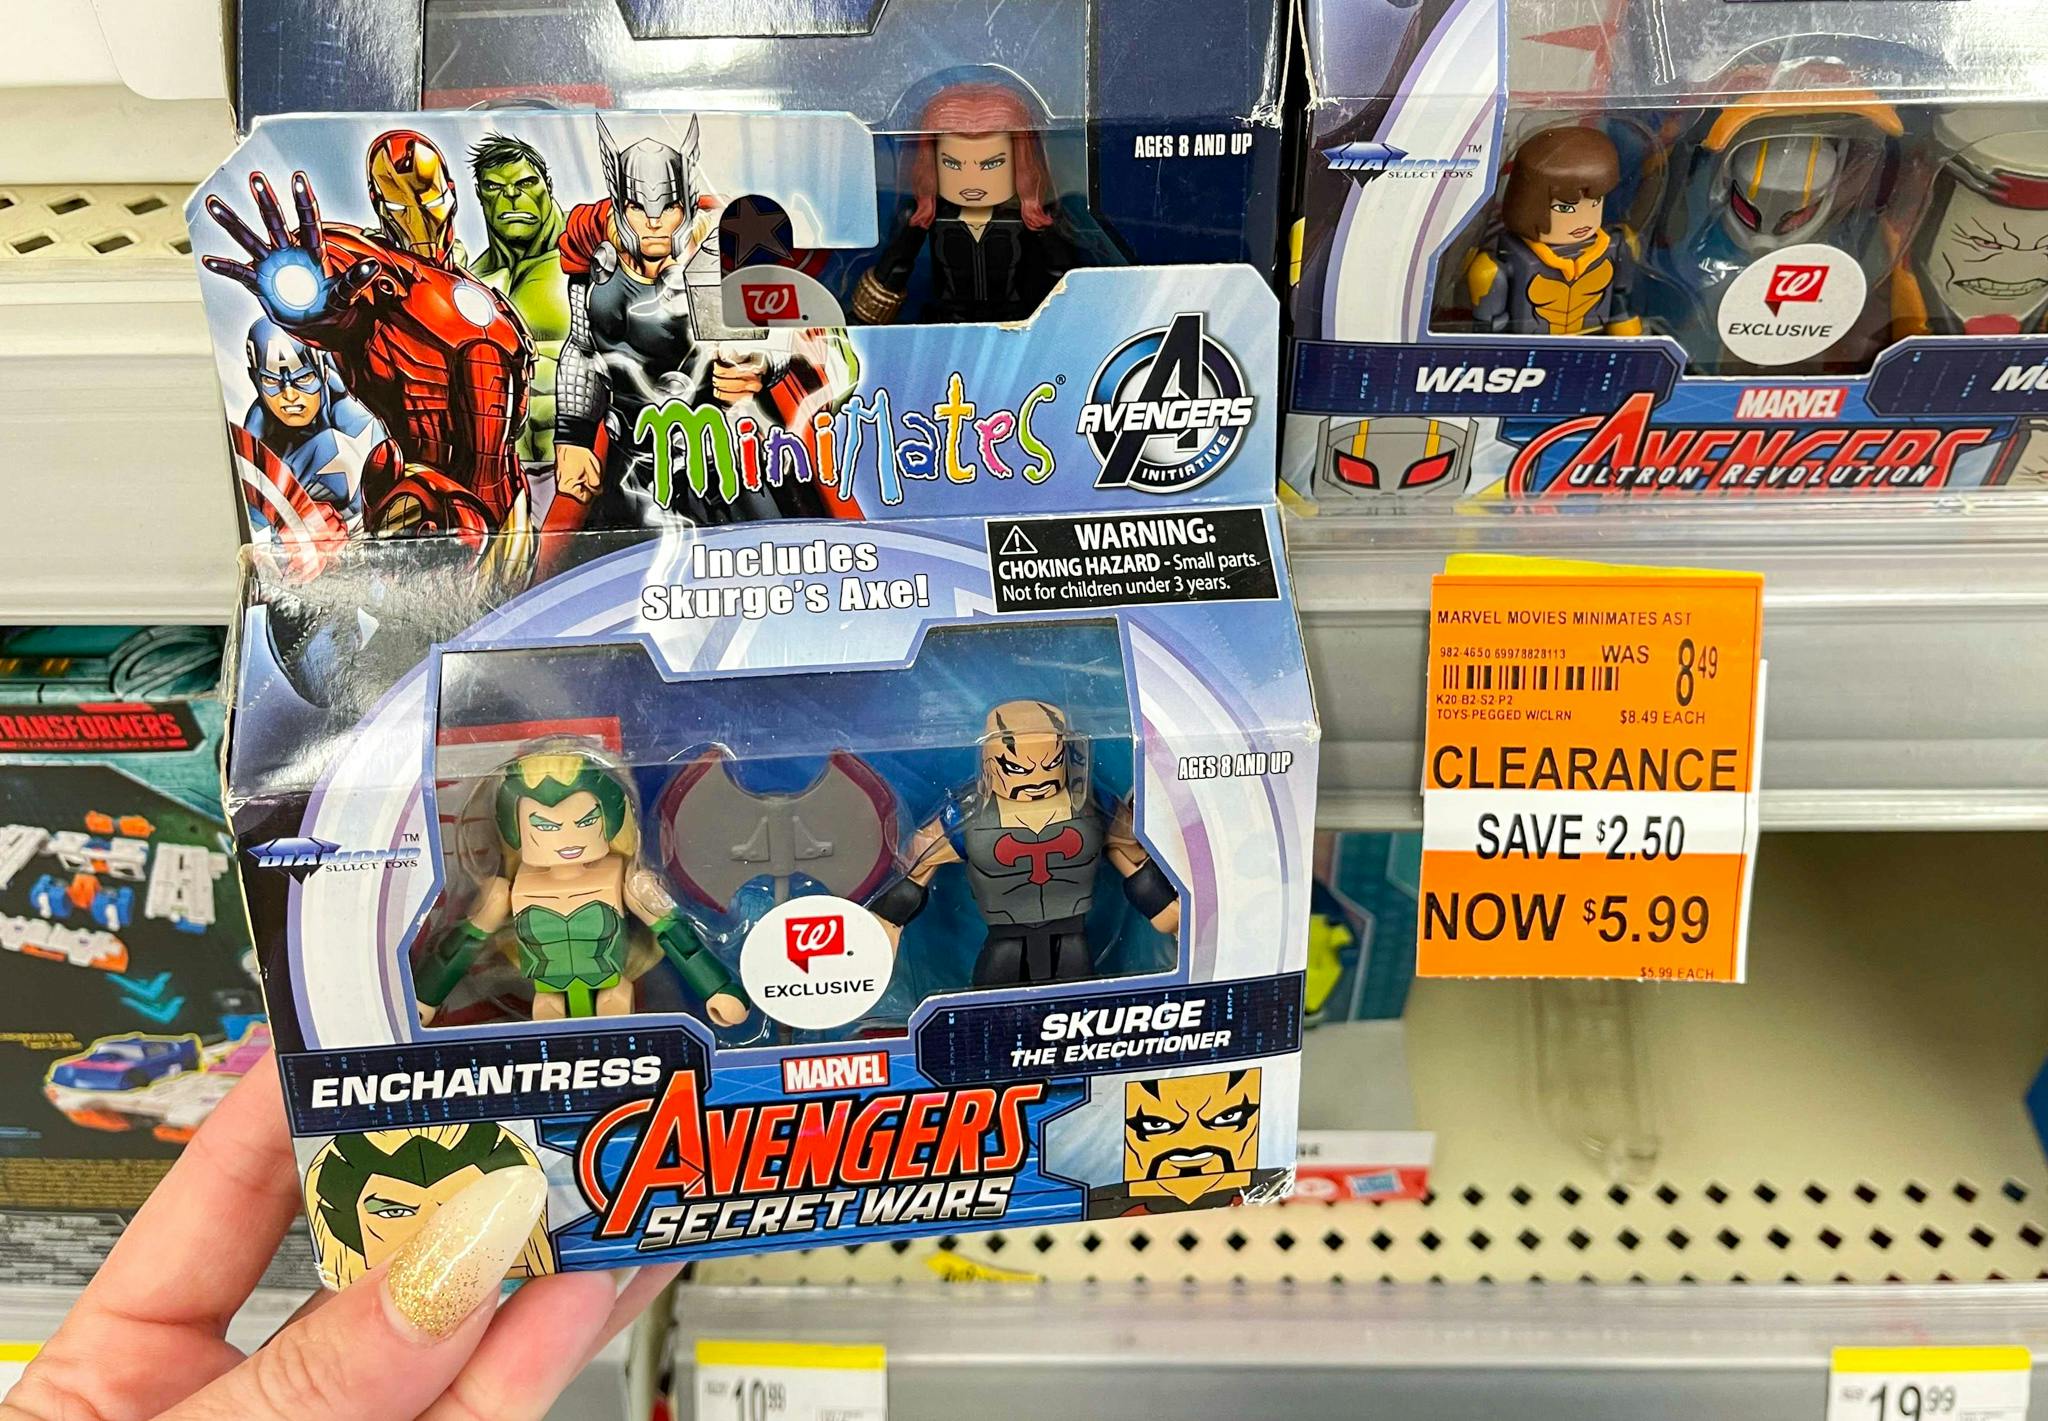 A person's hand holding a clearance Marvel toy next to a clearance sticker on a shelf at Walgreens.